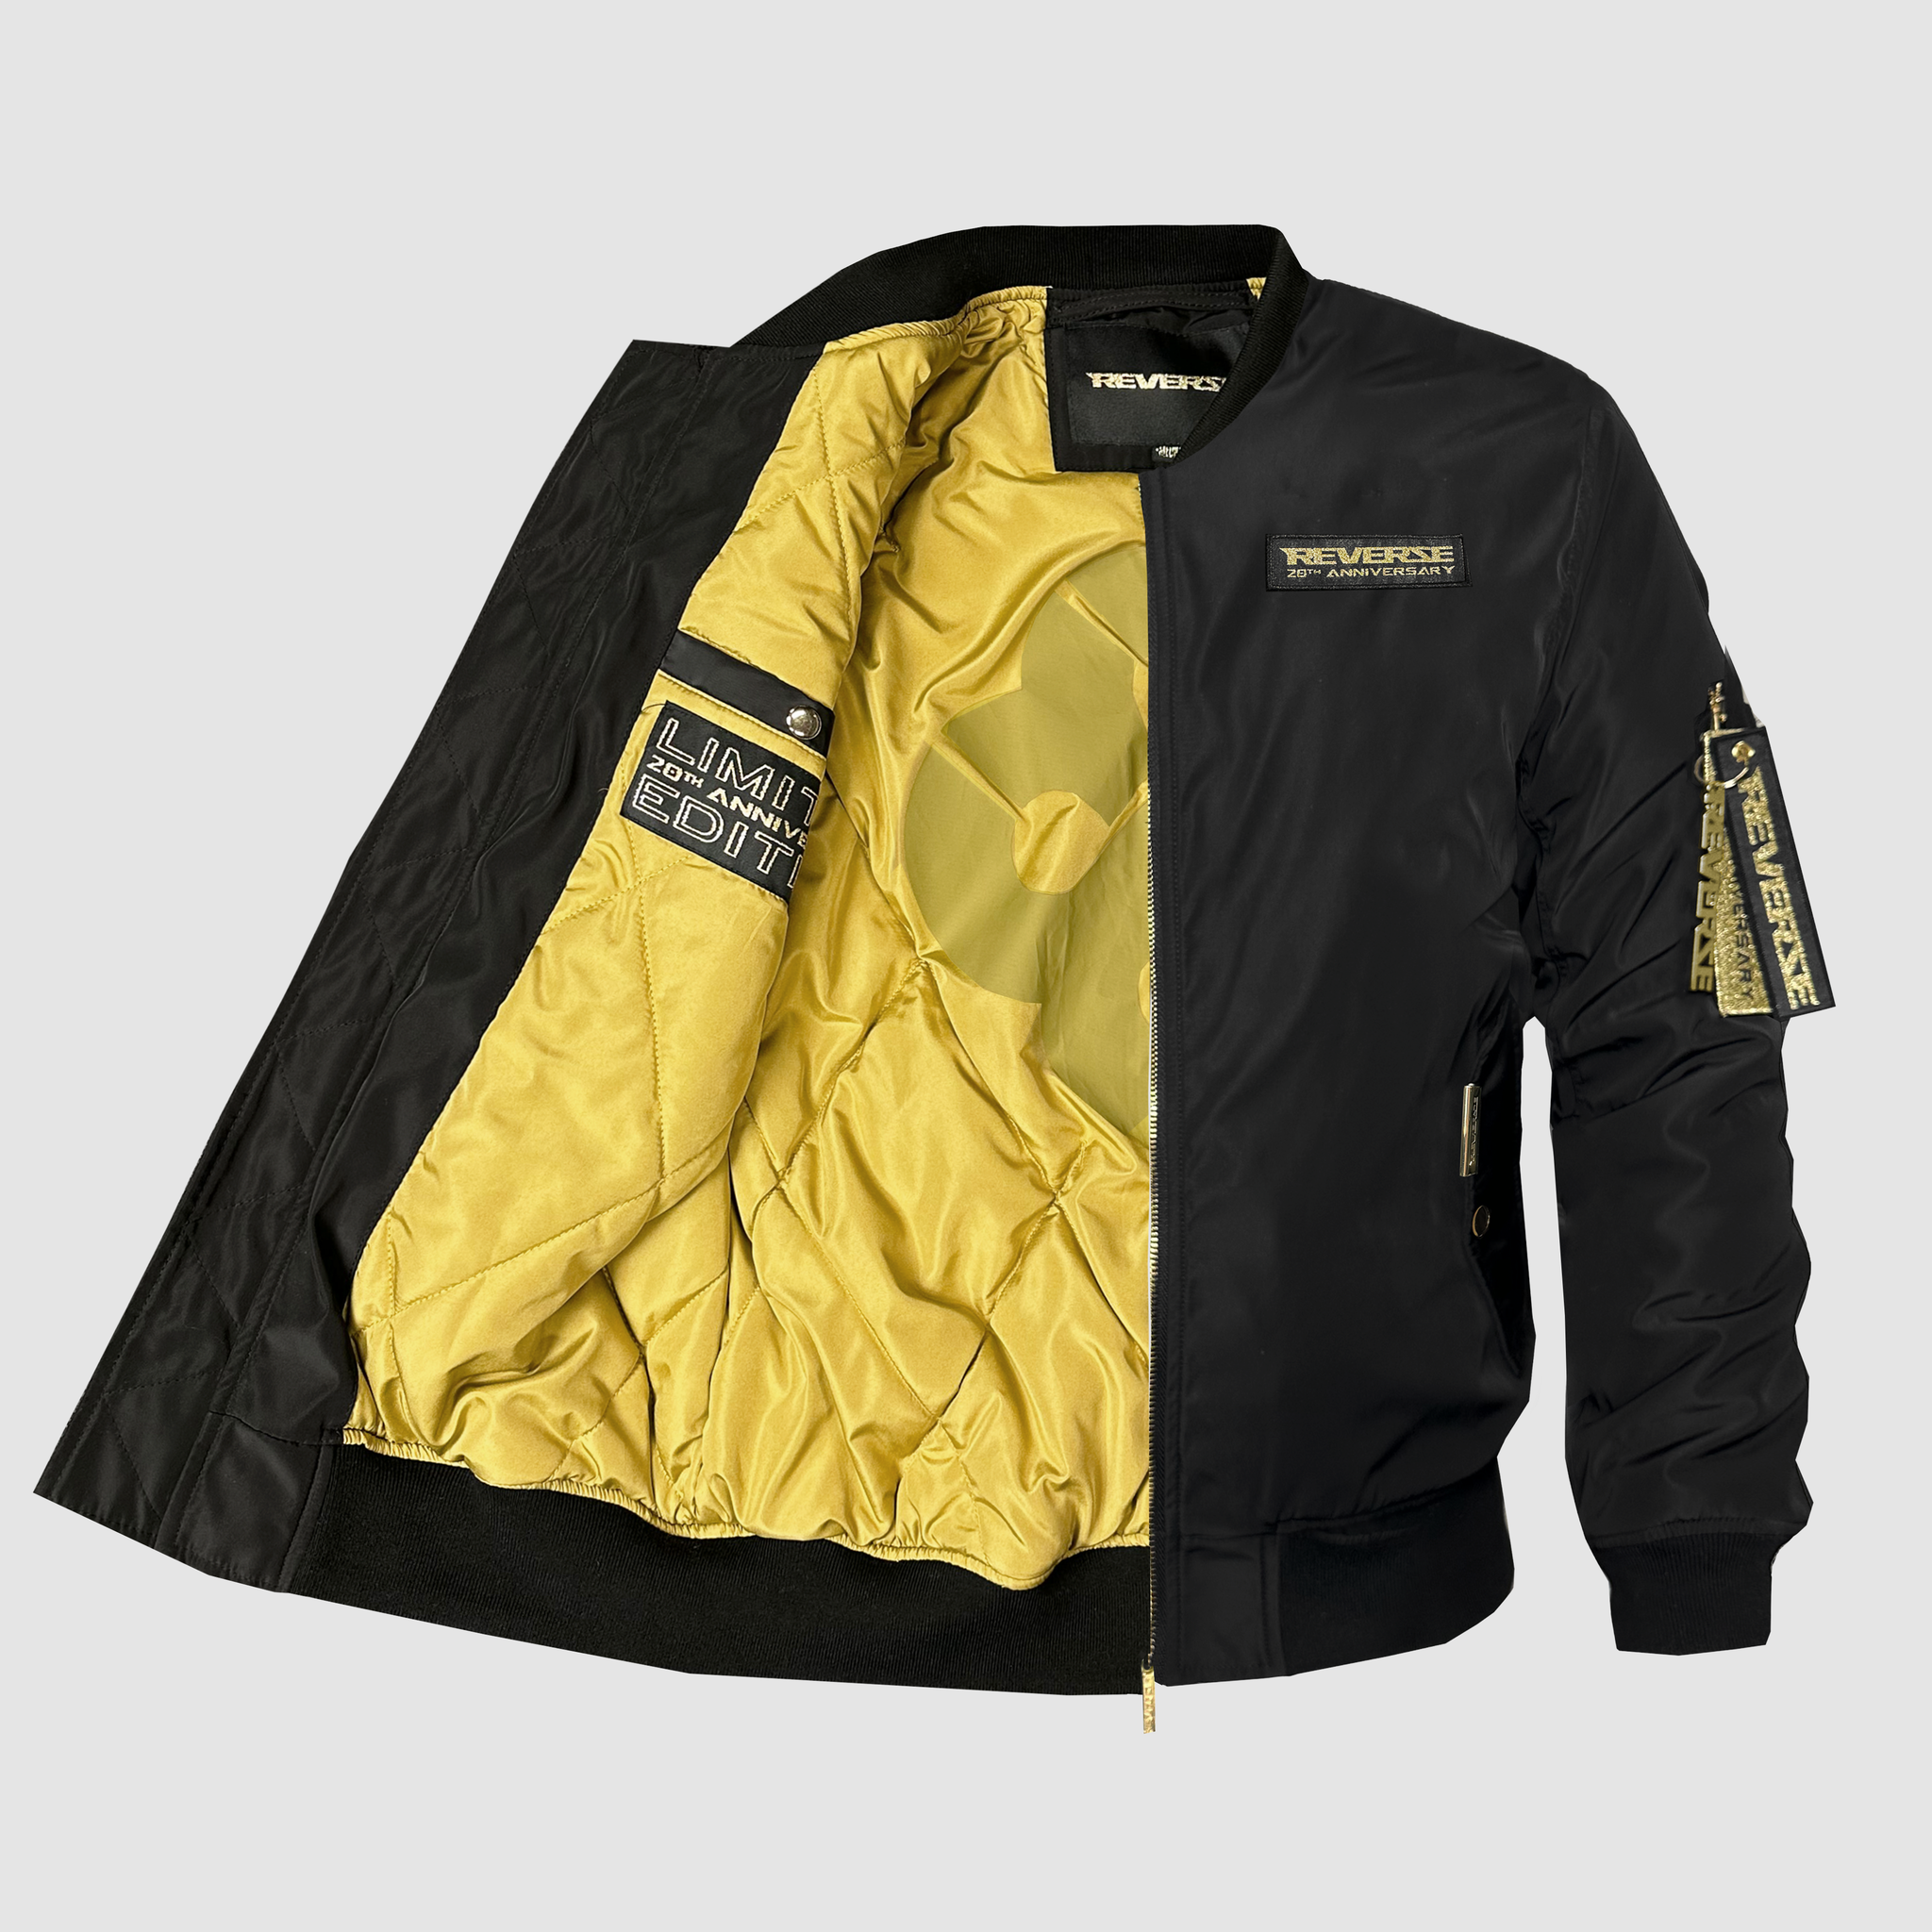 20th Anniversary Limited Edition Jacket